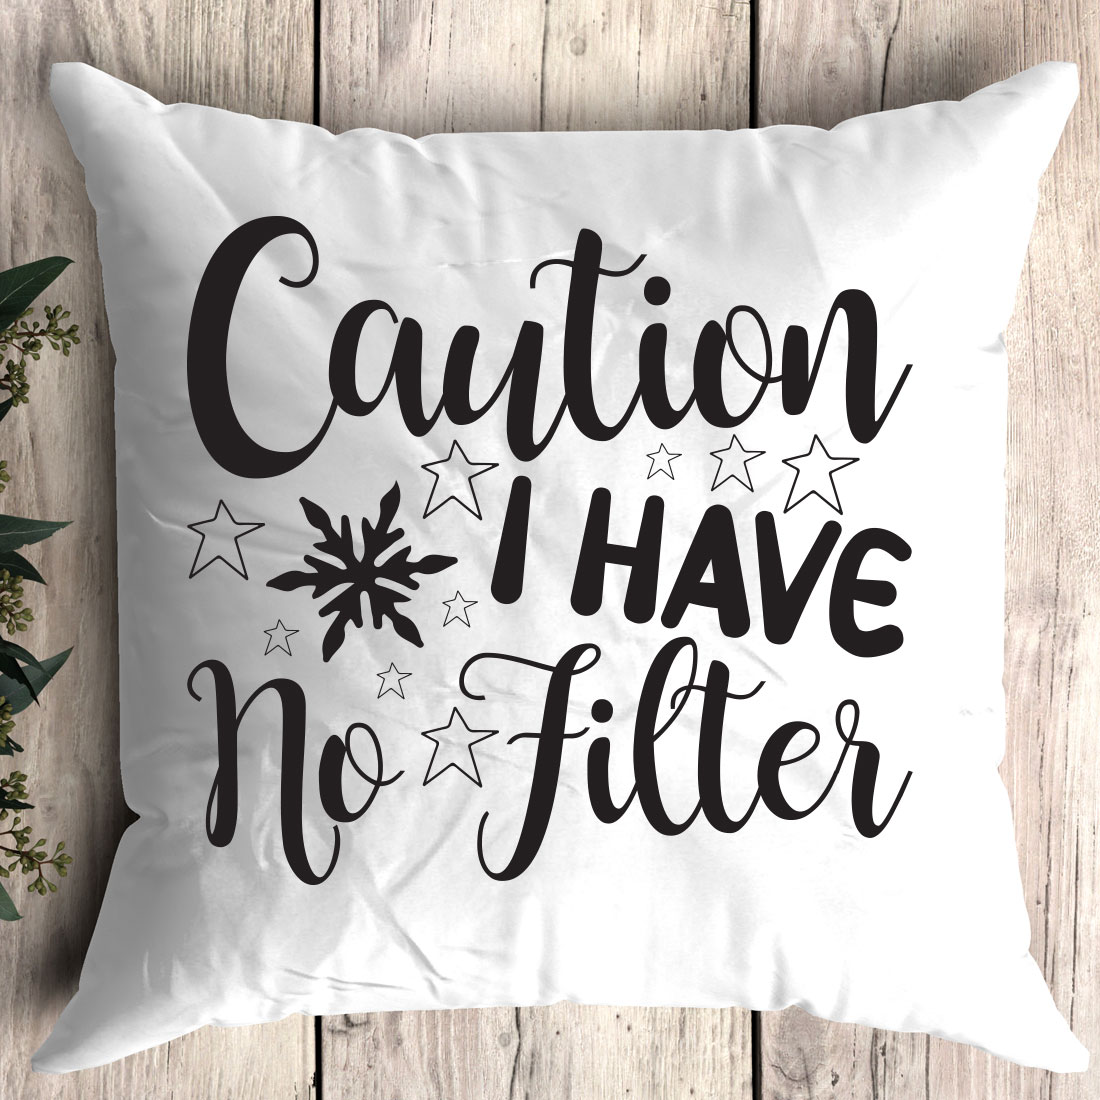 Pillow that says caution i have no filter.